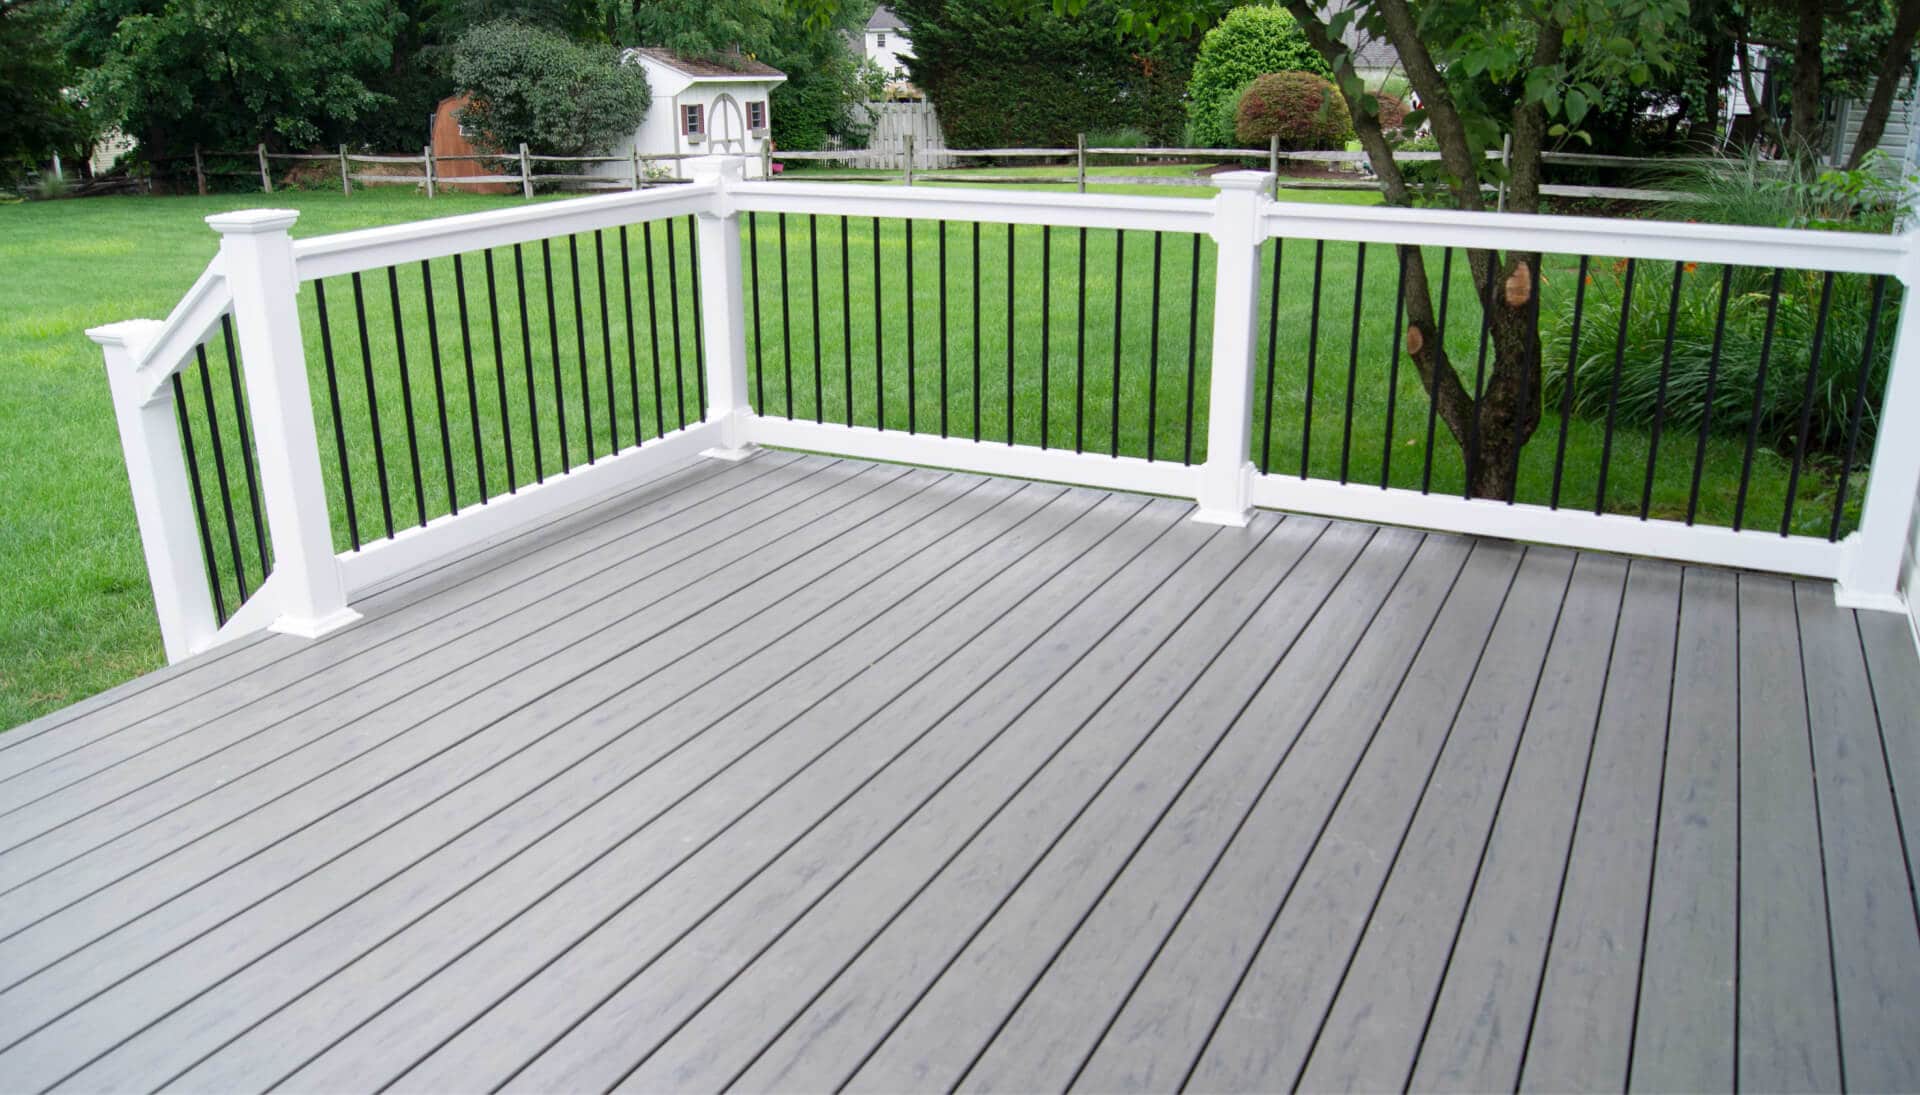 Waldorf’s, MD Trusted Deck Builders: We Install Safe and Stylish Railing and Covers